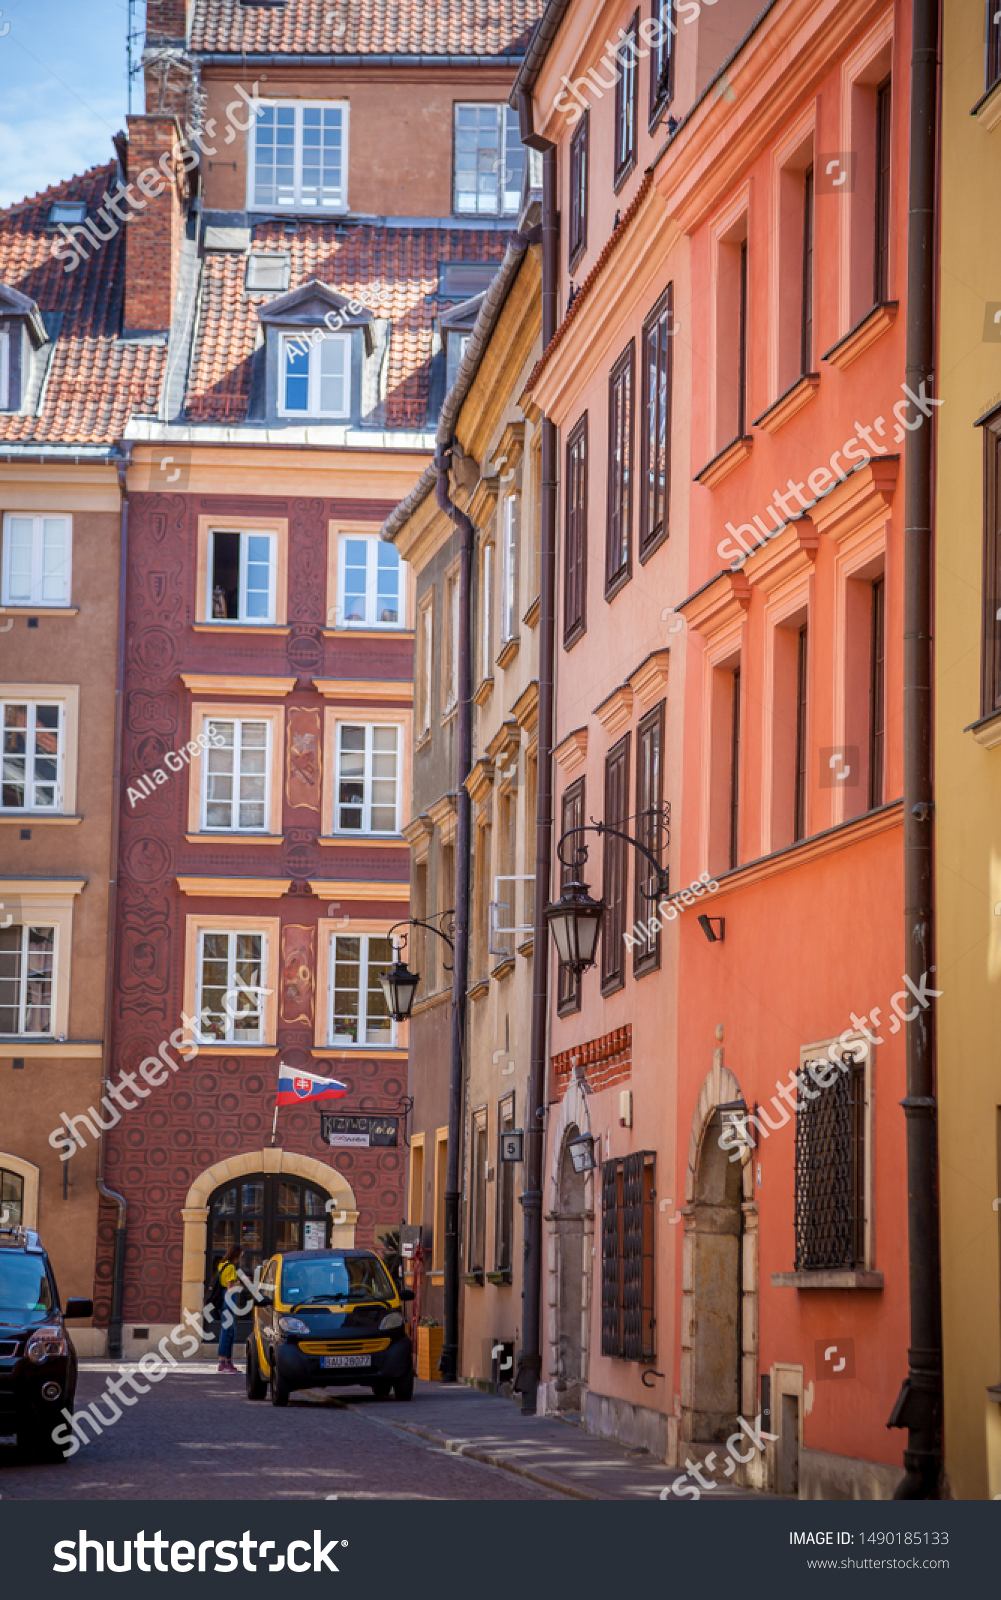 Warsaw, Poland - July 2, 2019: Streets of the old city. Polish ancient architecture. European city - tourist route attractions. Attraction - colorful houses, paving stones in the streets. #1490185133